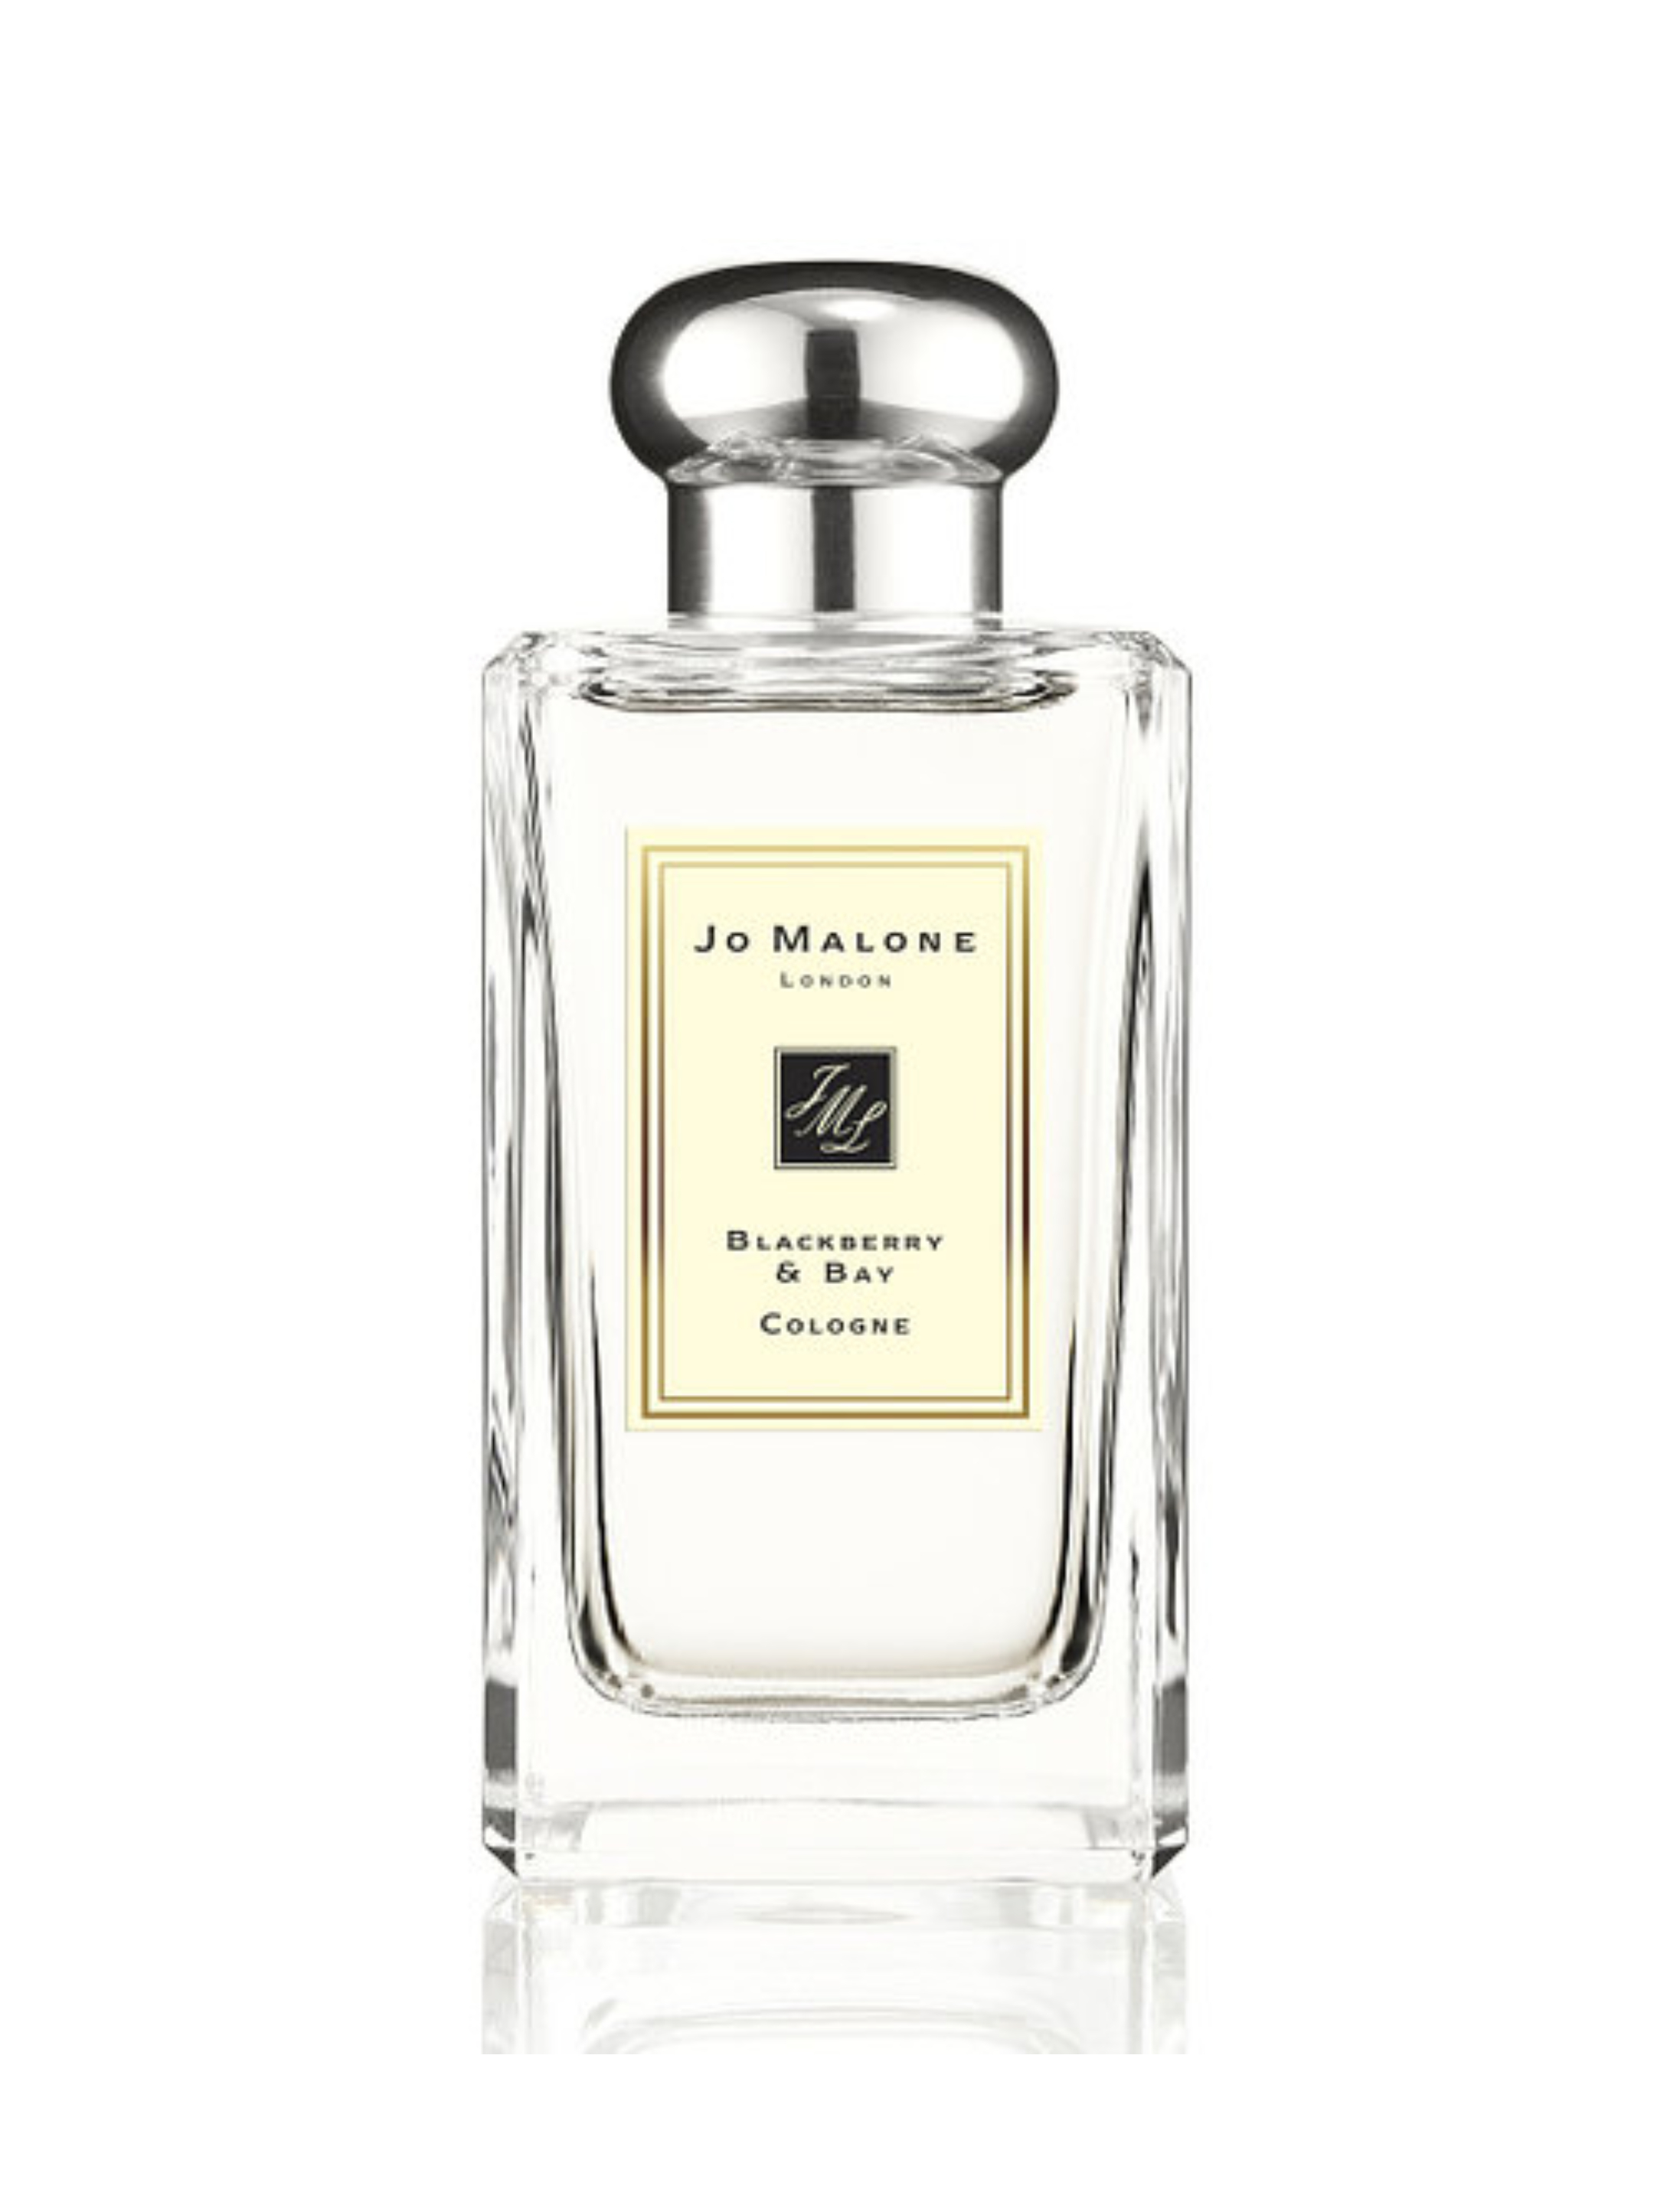 Jo Malone London Blackberry  Bay Cologne, 100 ml buy for 79000 KZT in  the official Viled online store, art. L32R010000